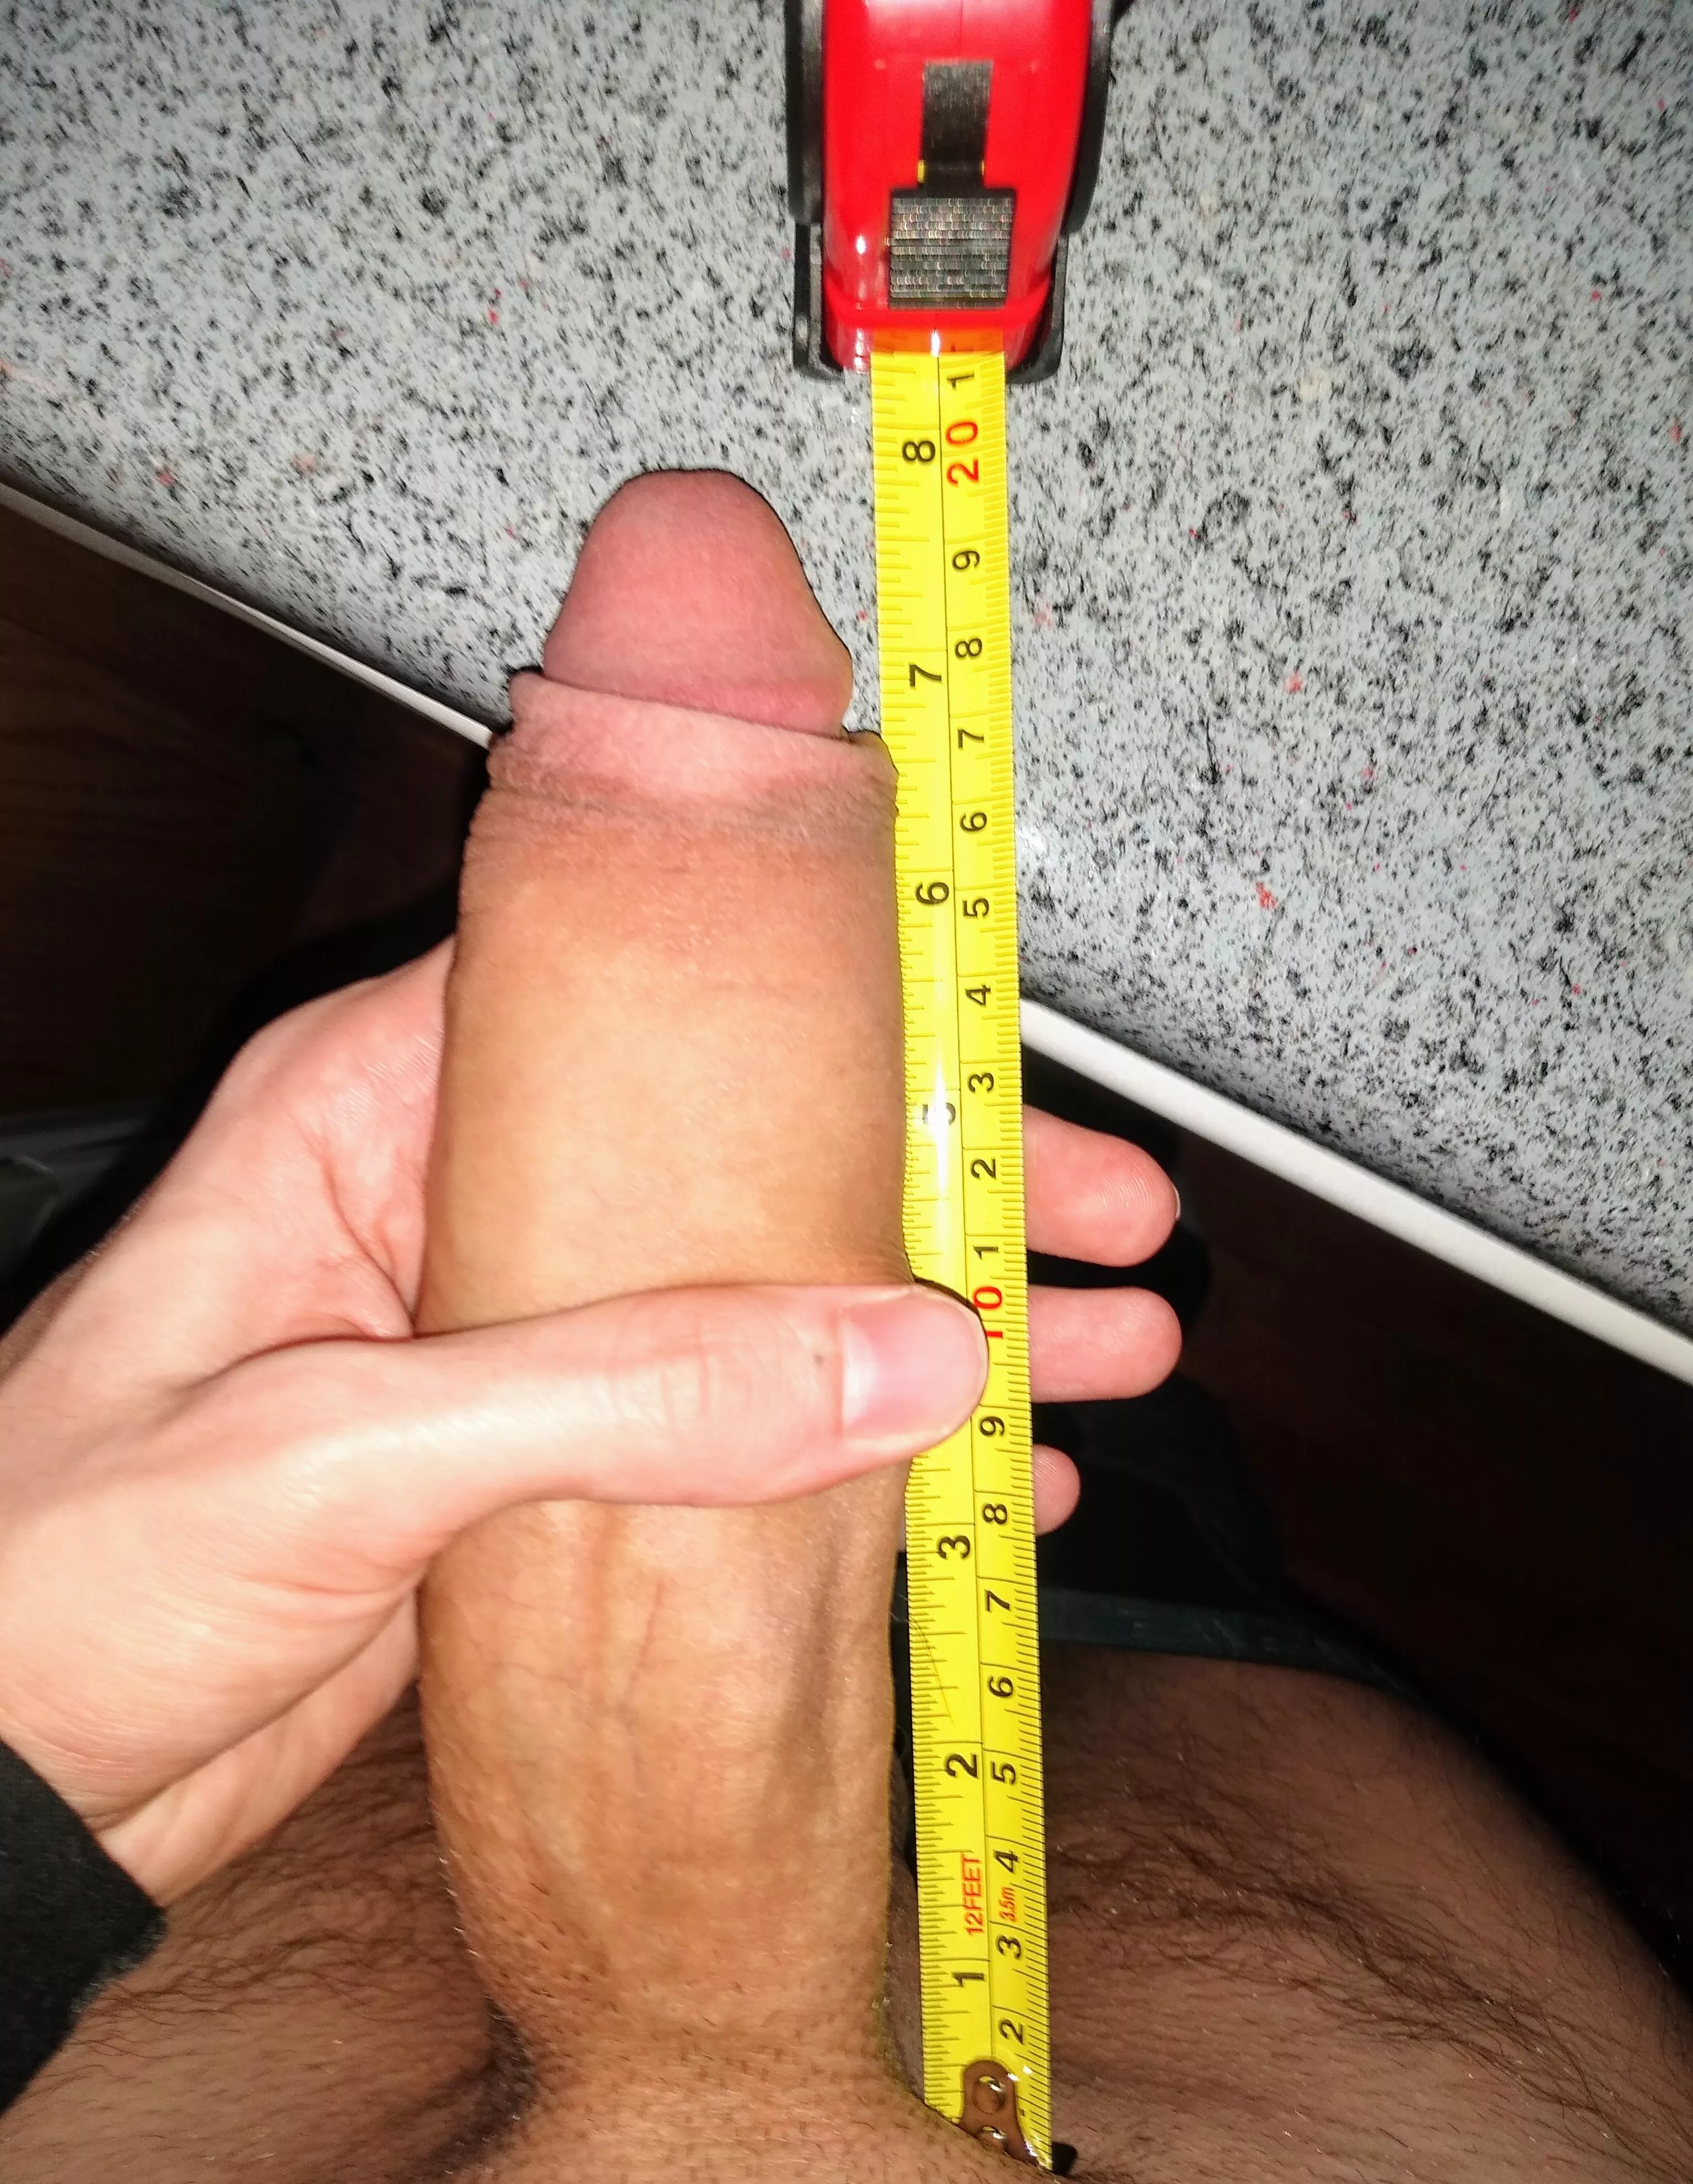 8 inch cock